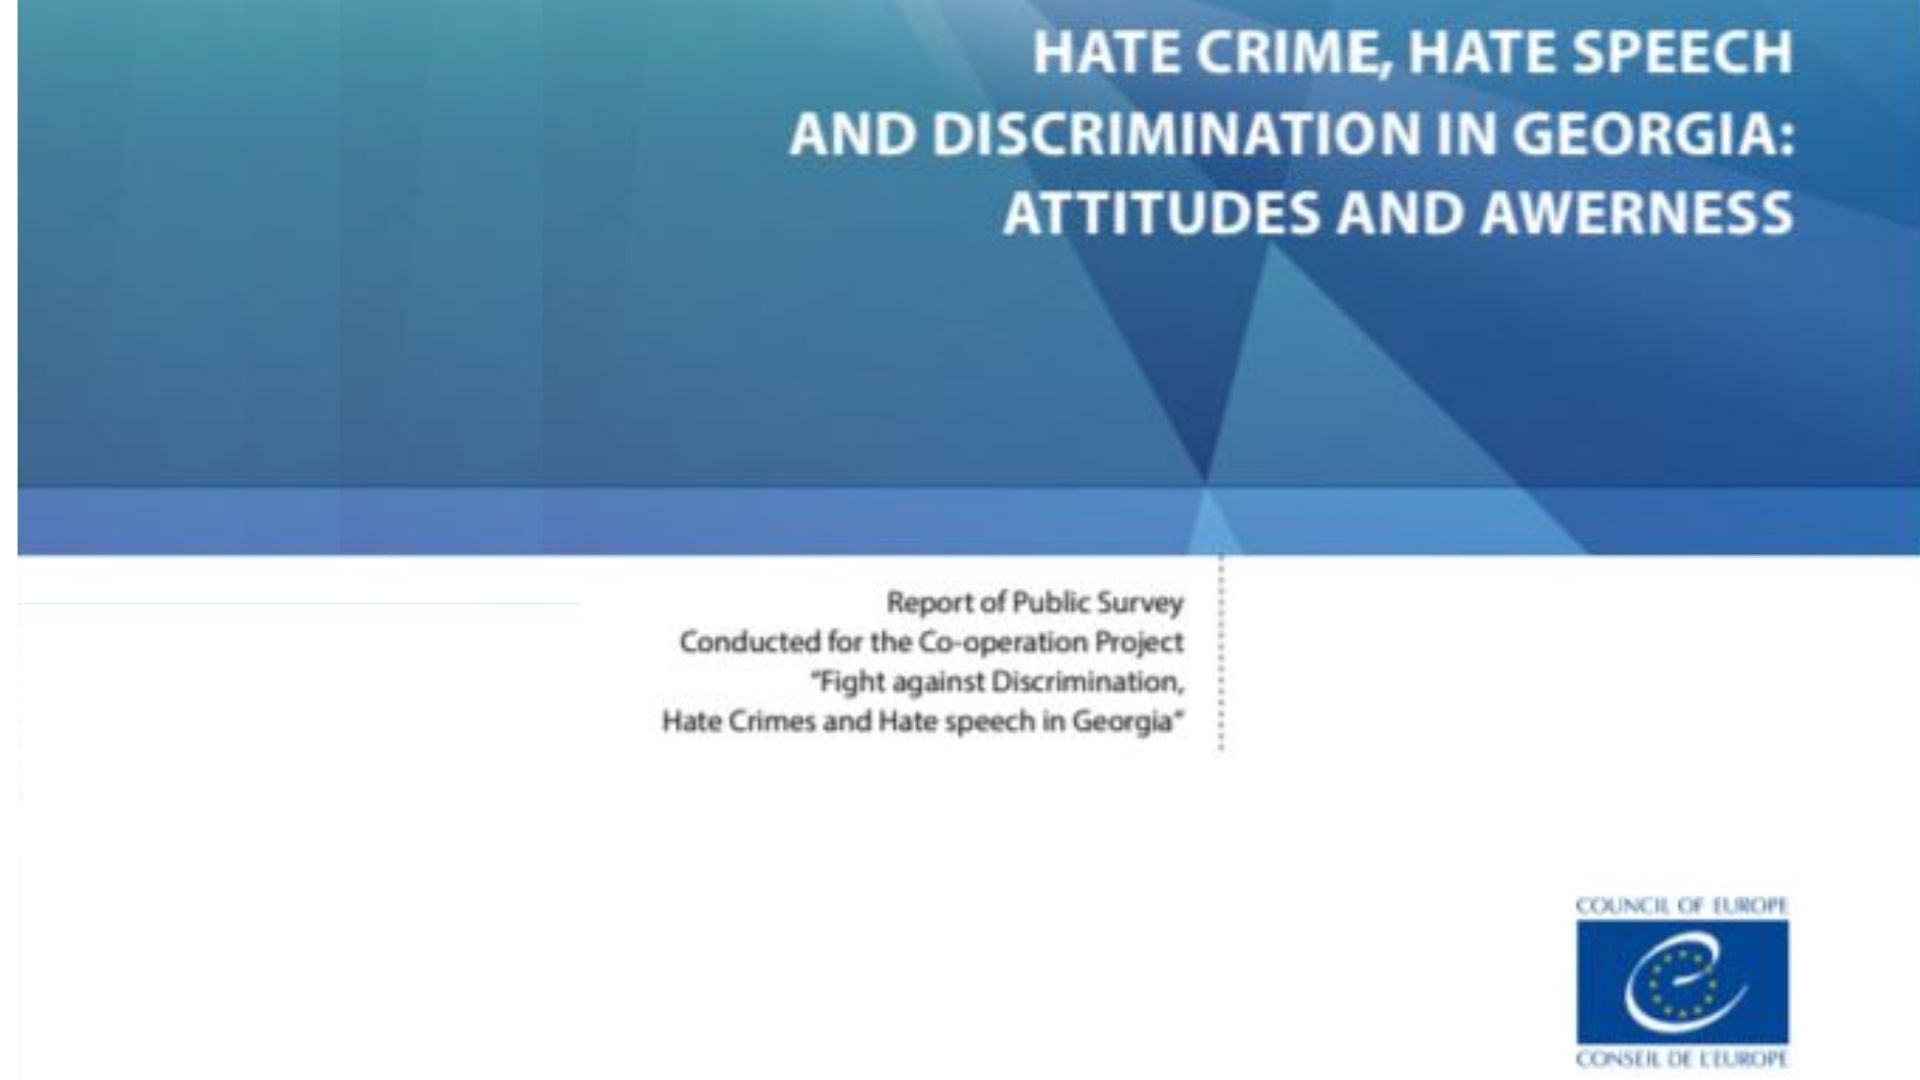 “Hate speech, hate crime and discrimination in Georgia: attitudes and awareness in 2021”: study findings to be presented by Council of Europe on Tuesday